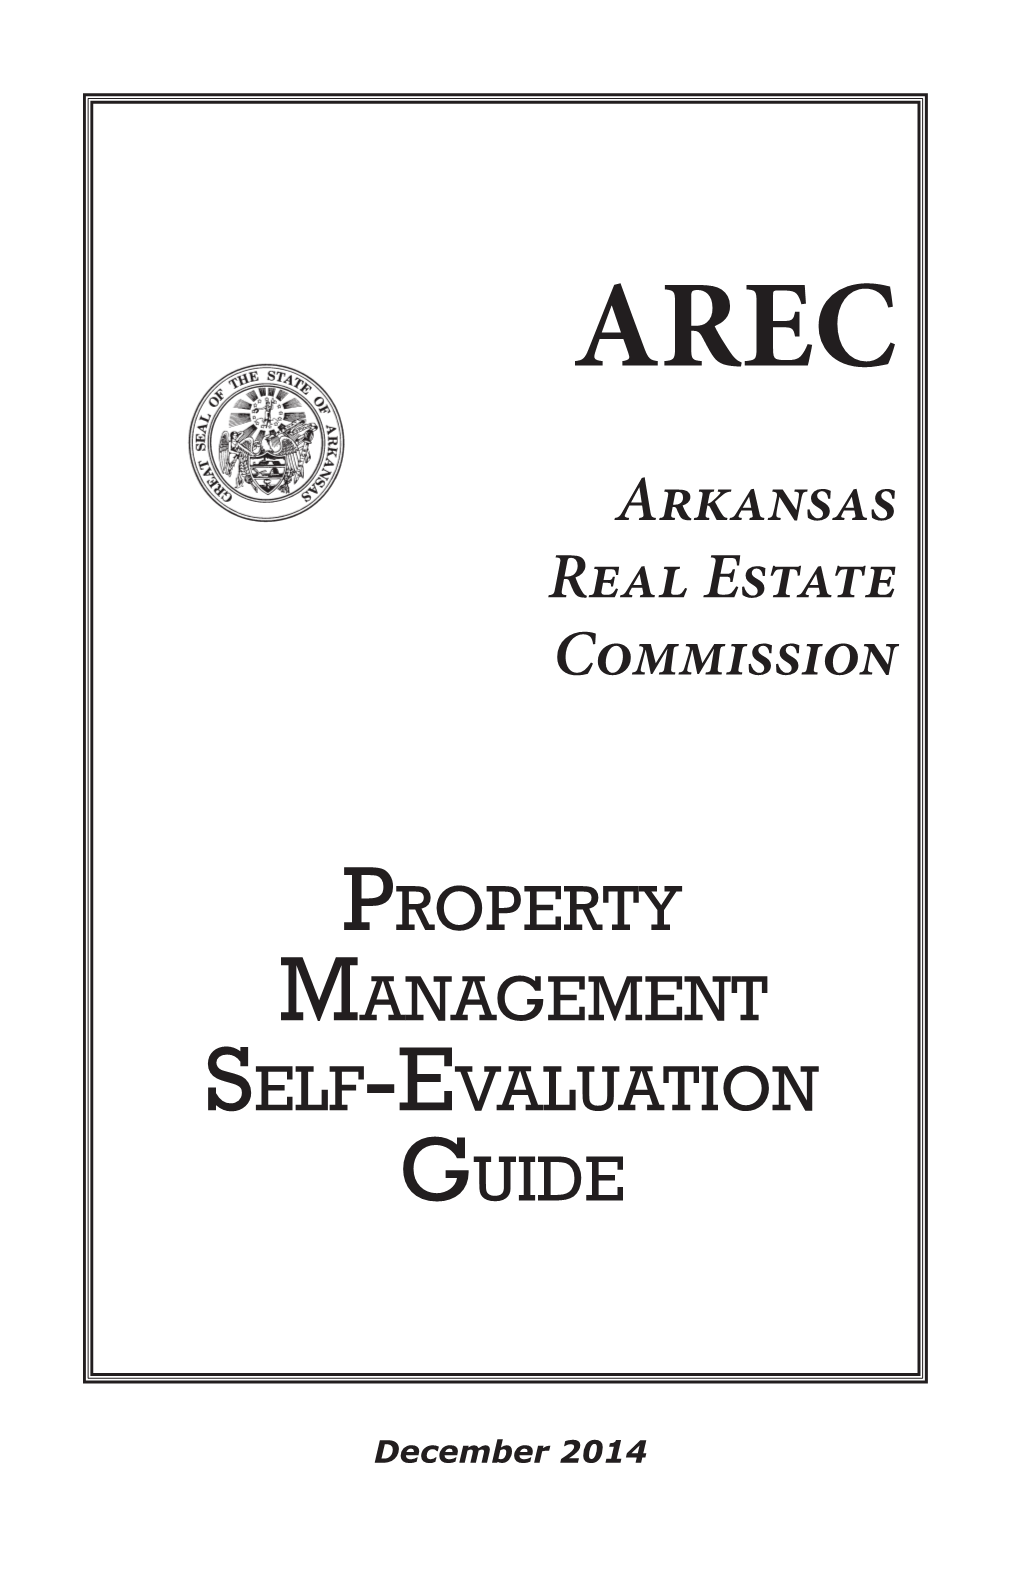 Property Management Self-Evaluation Guide